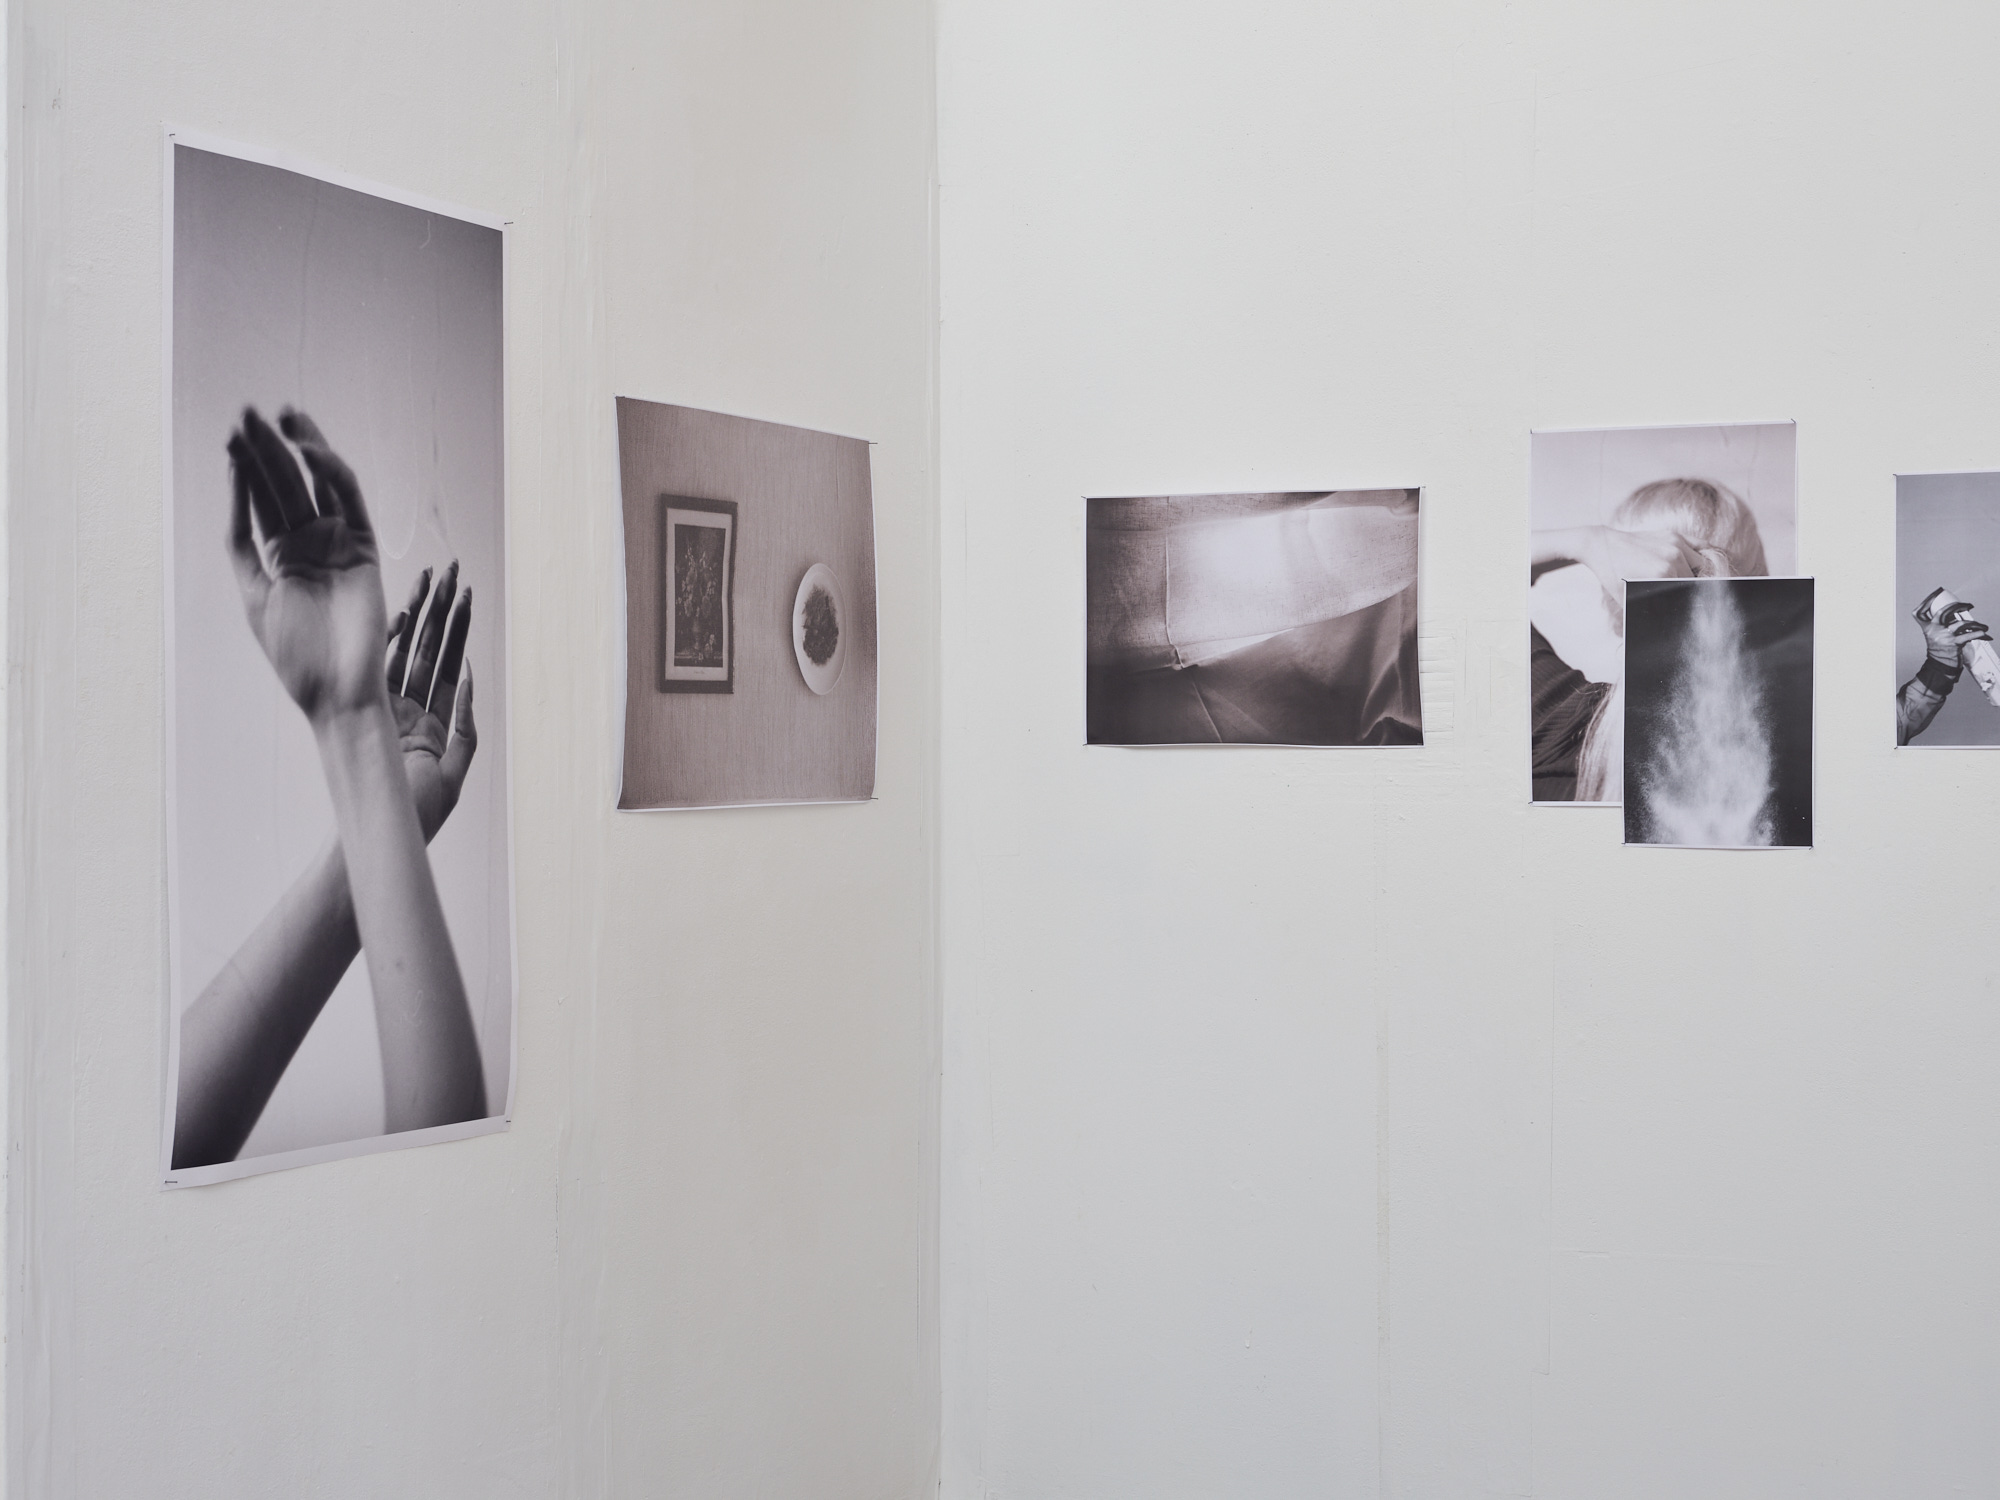 Photograph of a gallery exhibition of a series of black and white photographs at different scales on a white wall. From left to right the photographs show hands, a plate of food next to a photograph, an abstract image, the back of a head with an abstract image layered over the top.